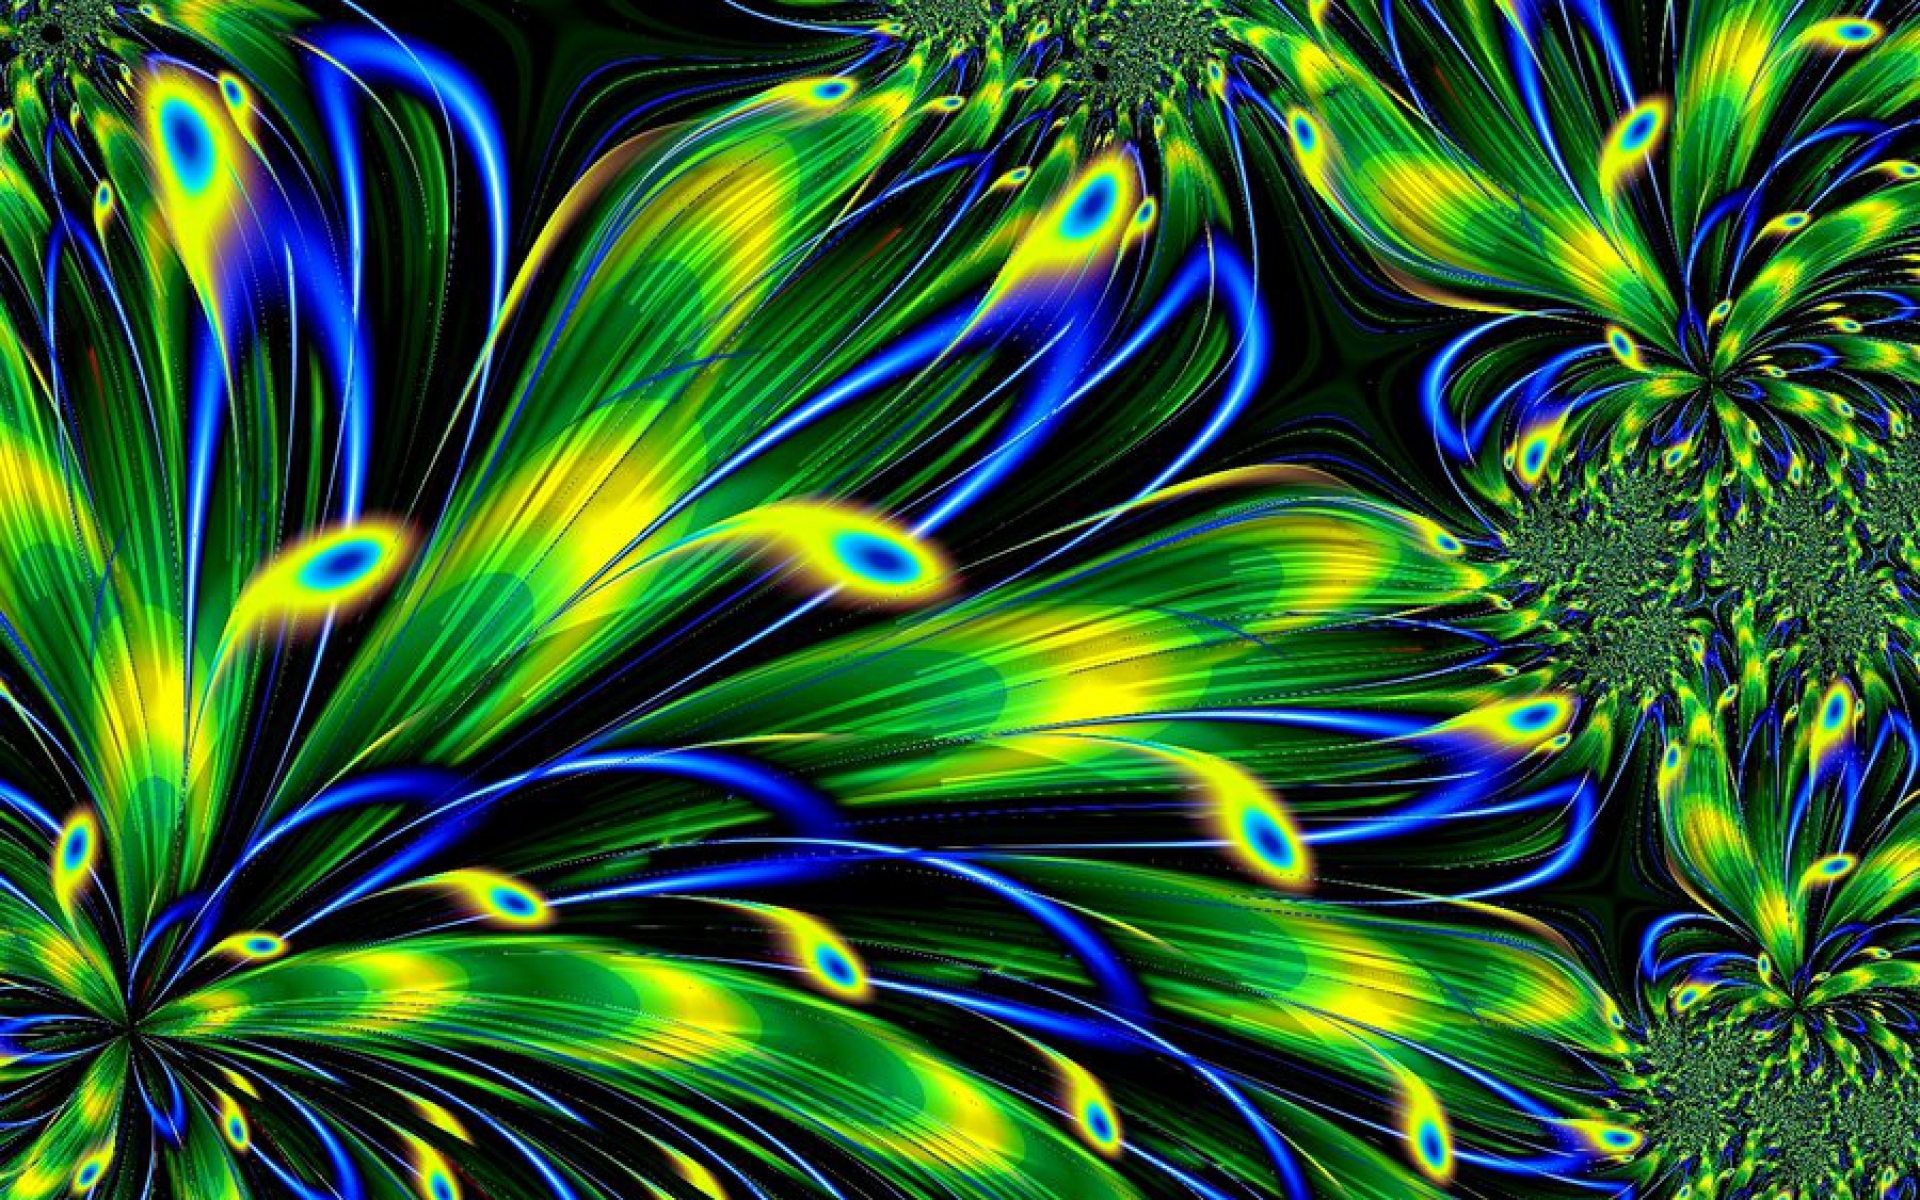 Abstract Peacock Feathers HD Wallpaper Background Image